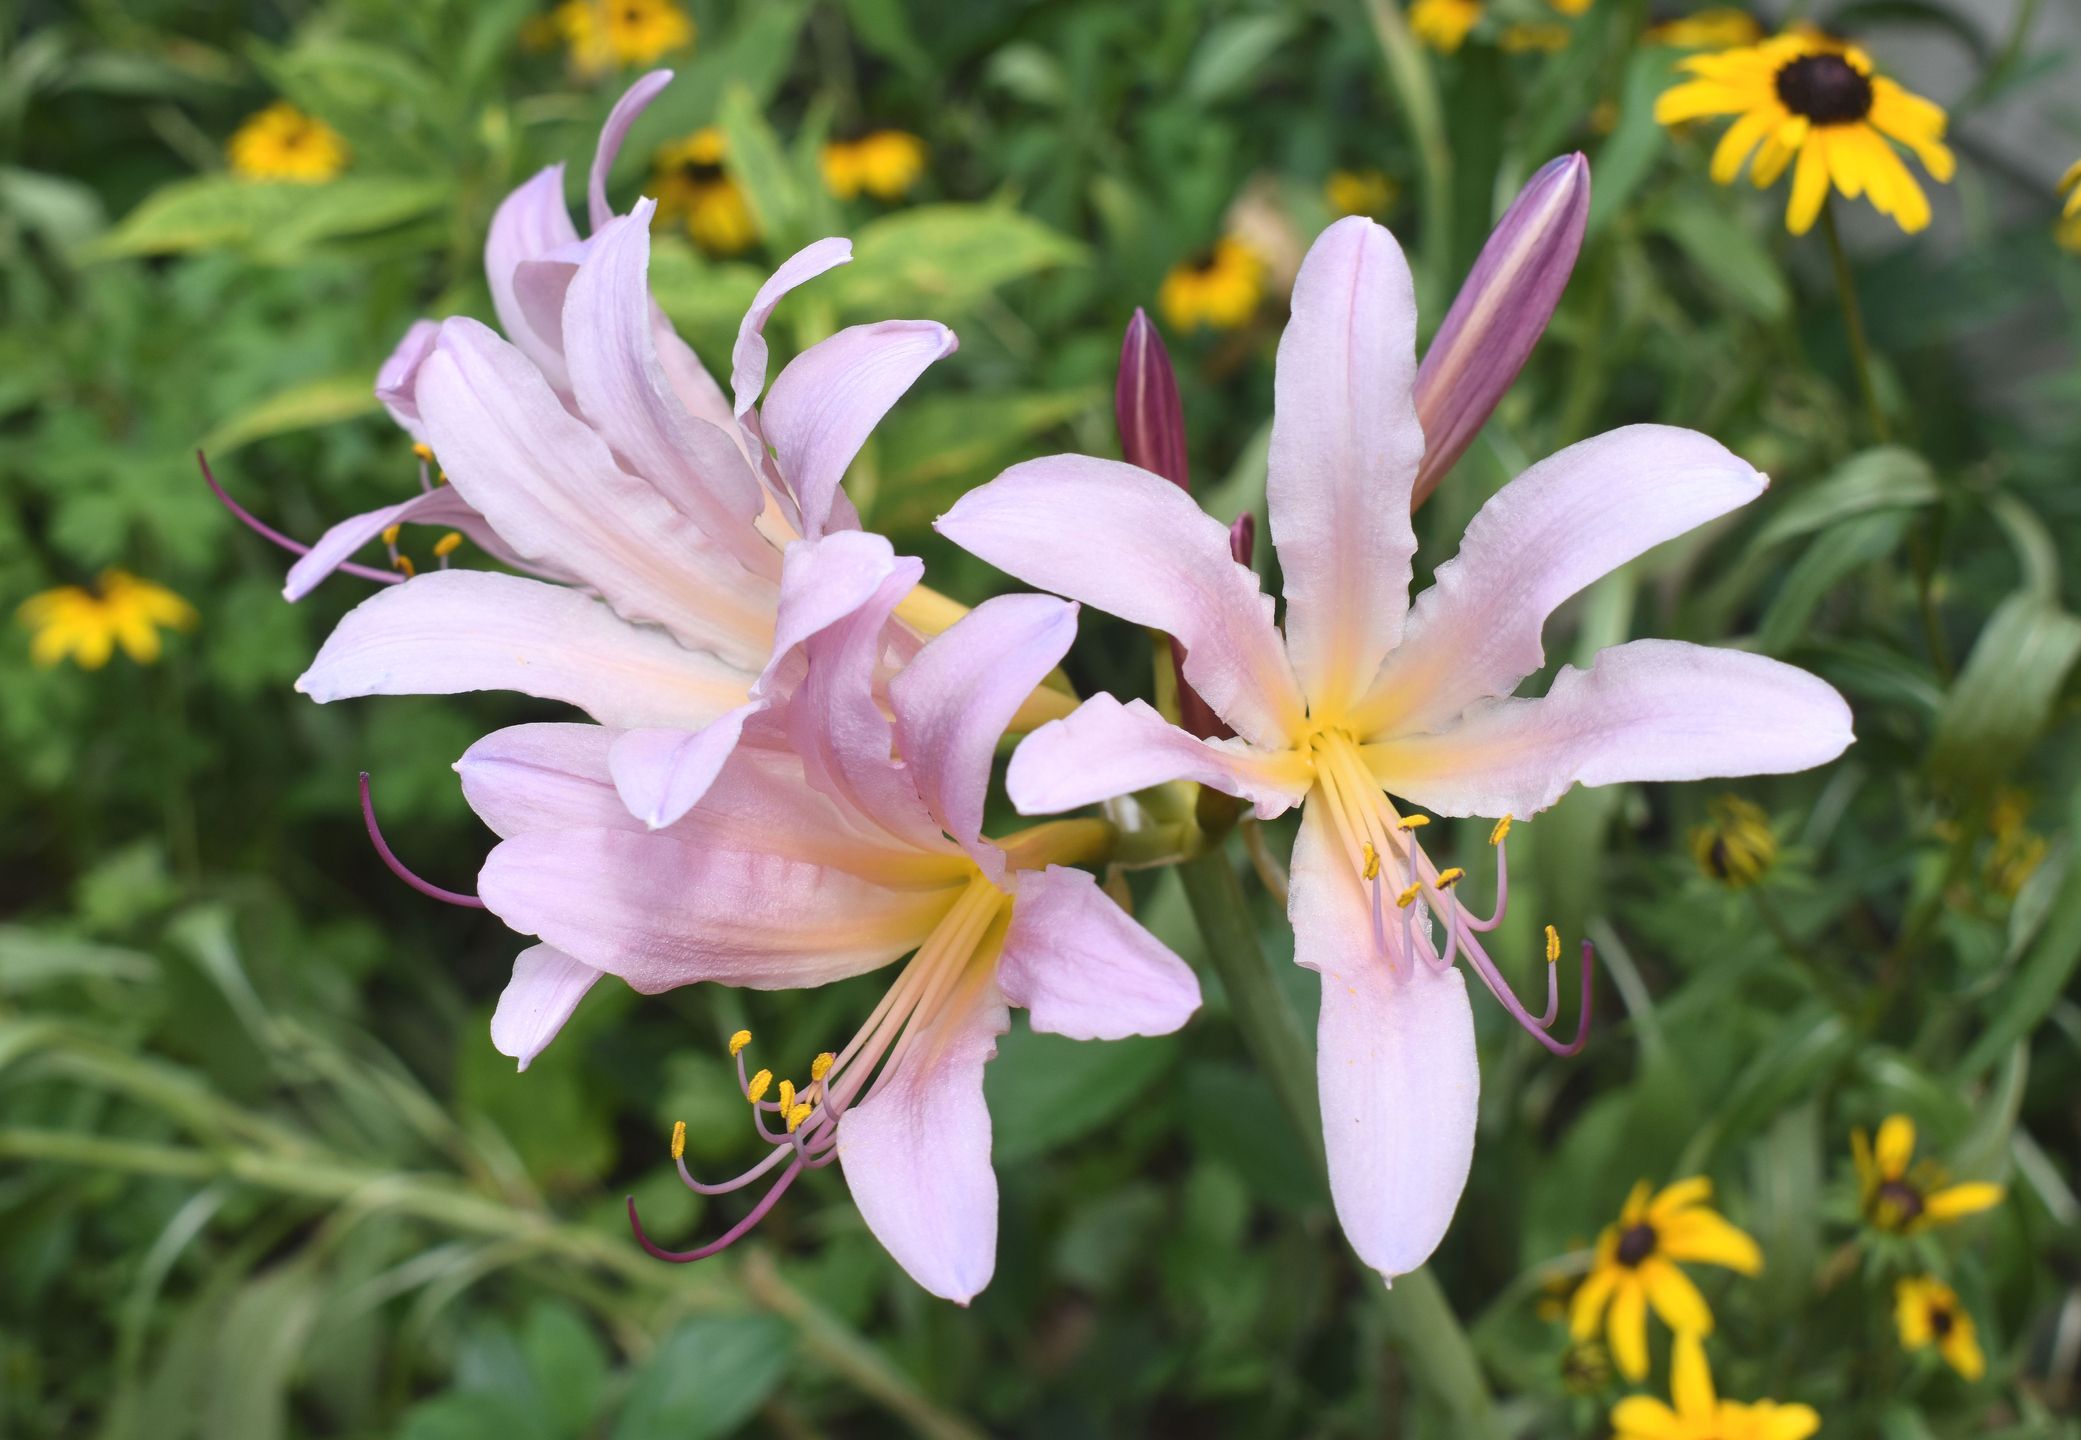 Magic Lilies Are the Fun, Colorful Pink Flowers You'll Want to